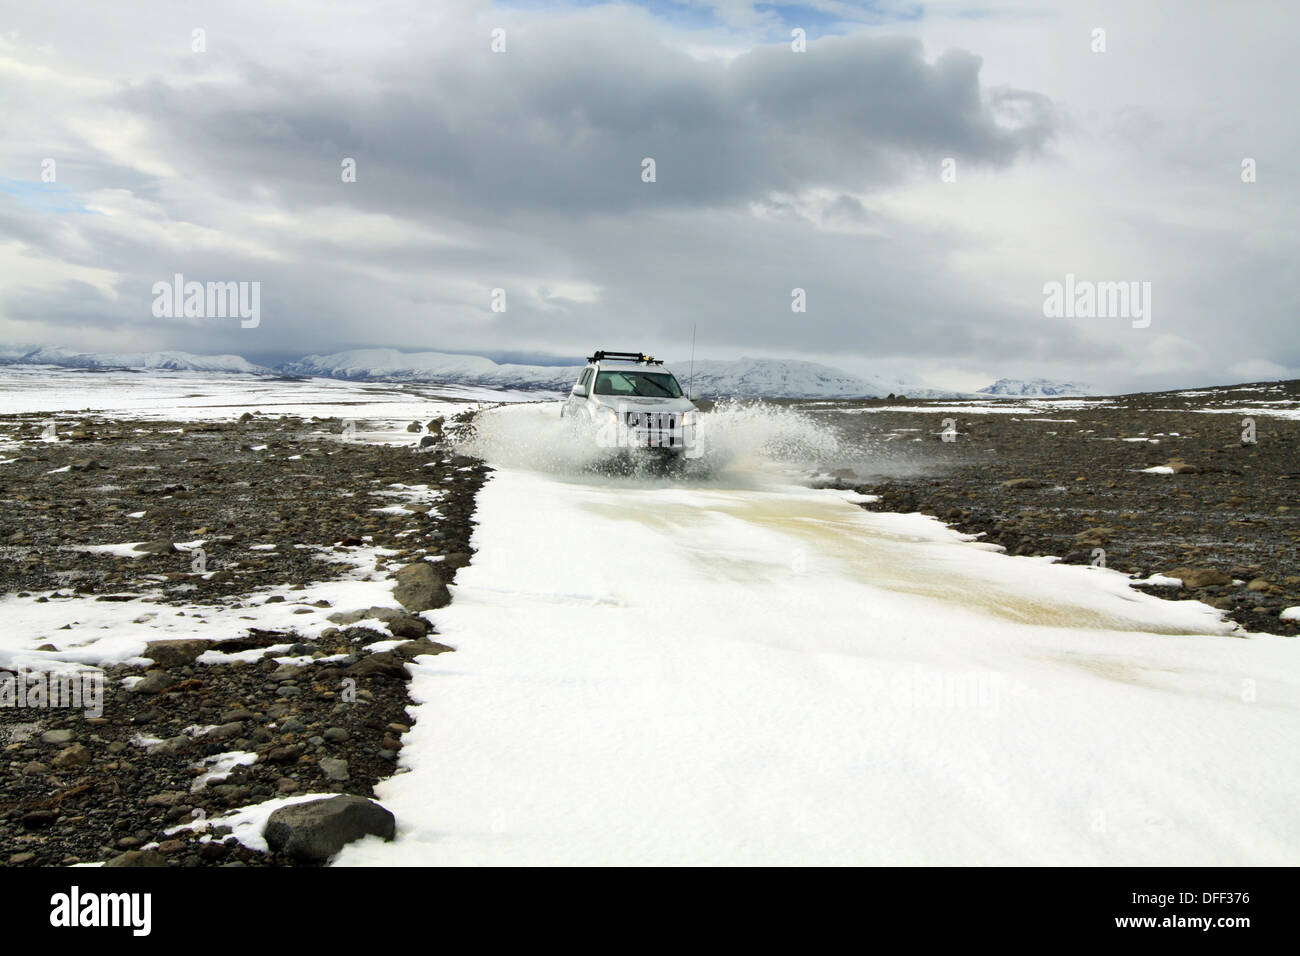 Highly modified Toyota Landcruiser driving in snow, Iceland Stock Photo